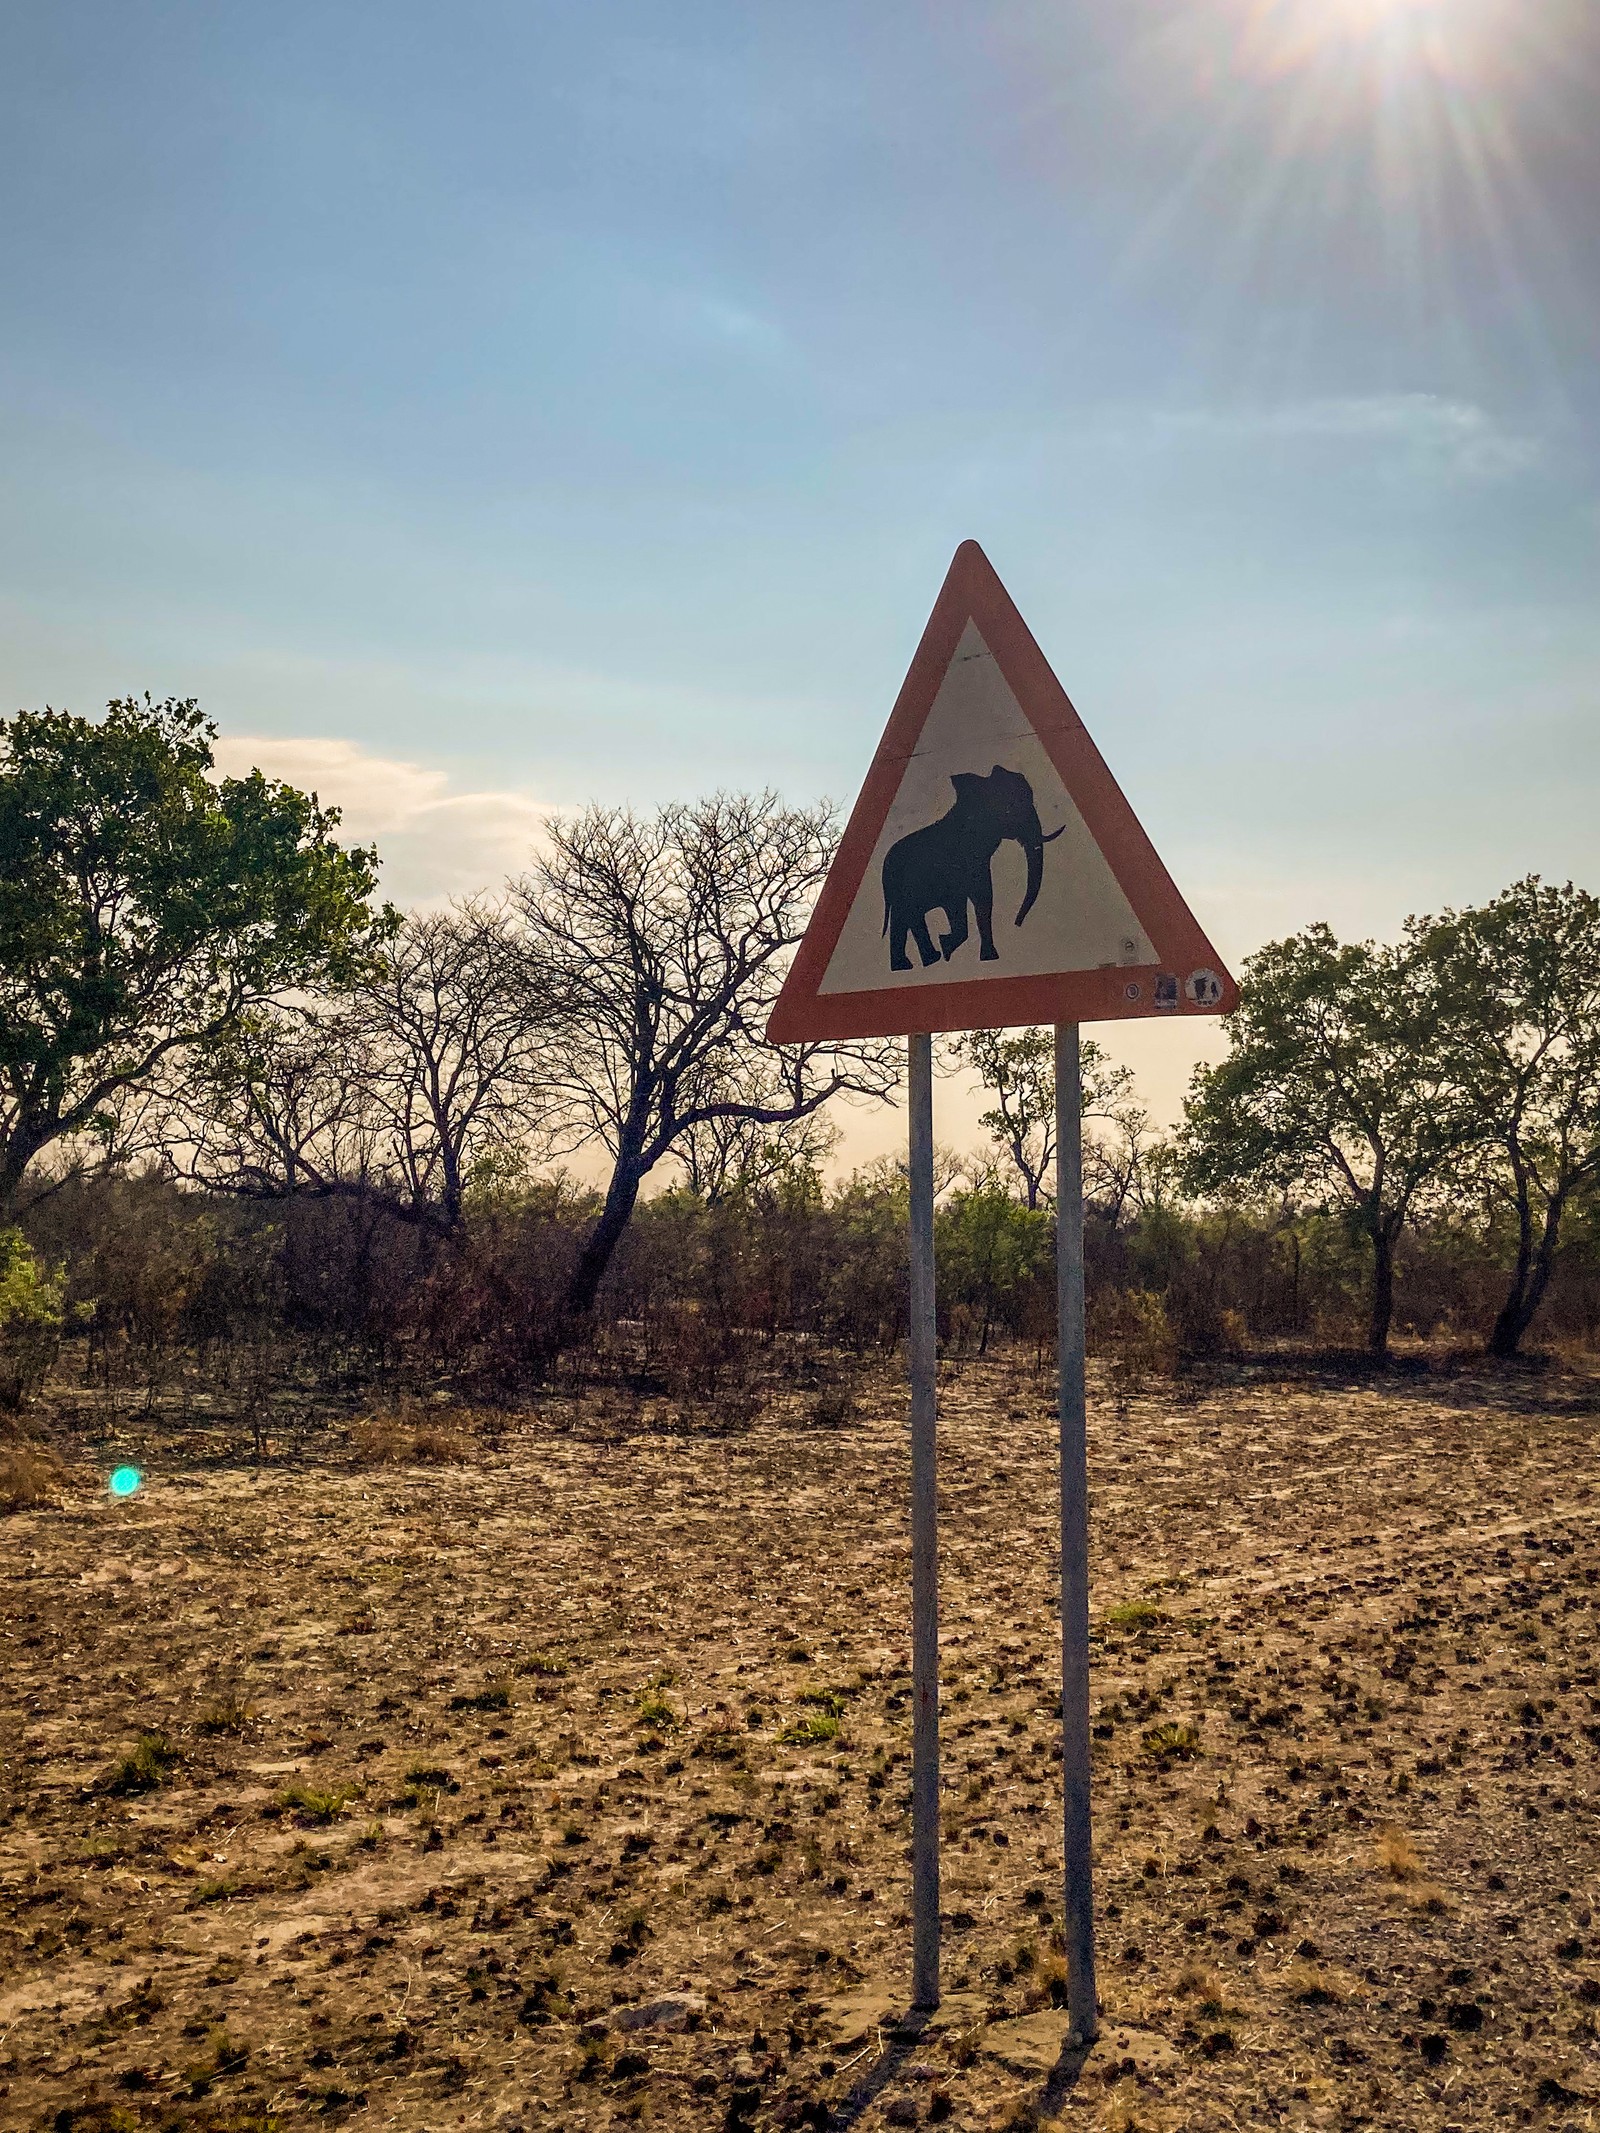 Watch out for Elephants